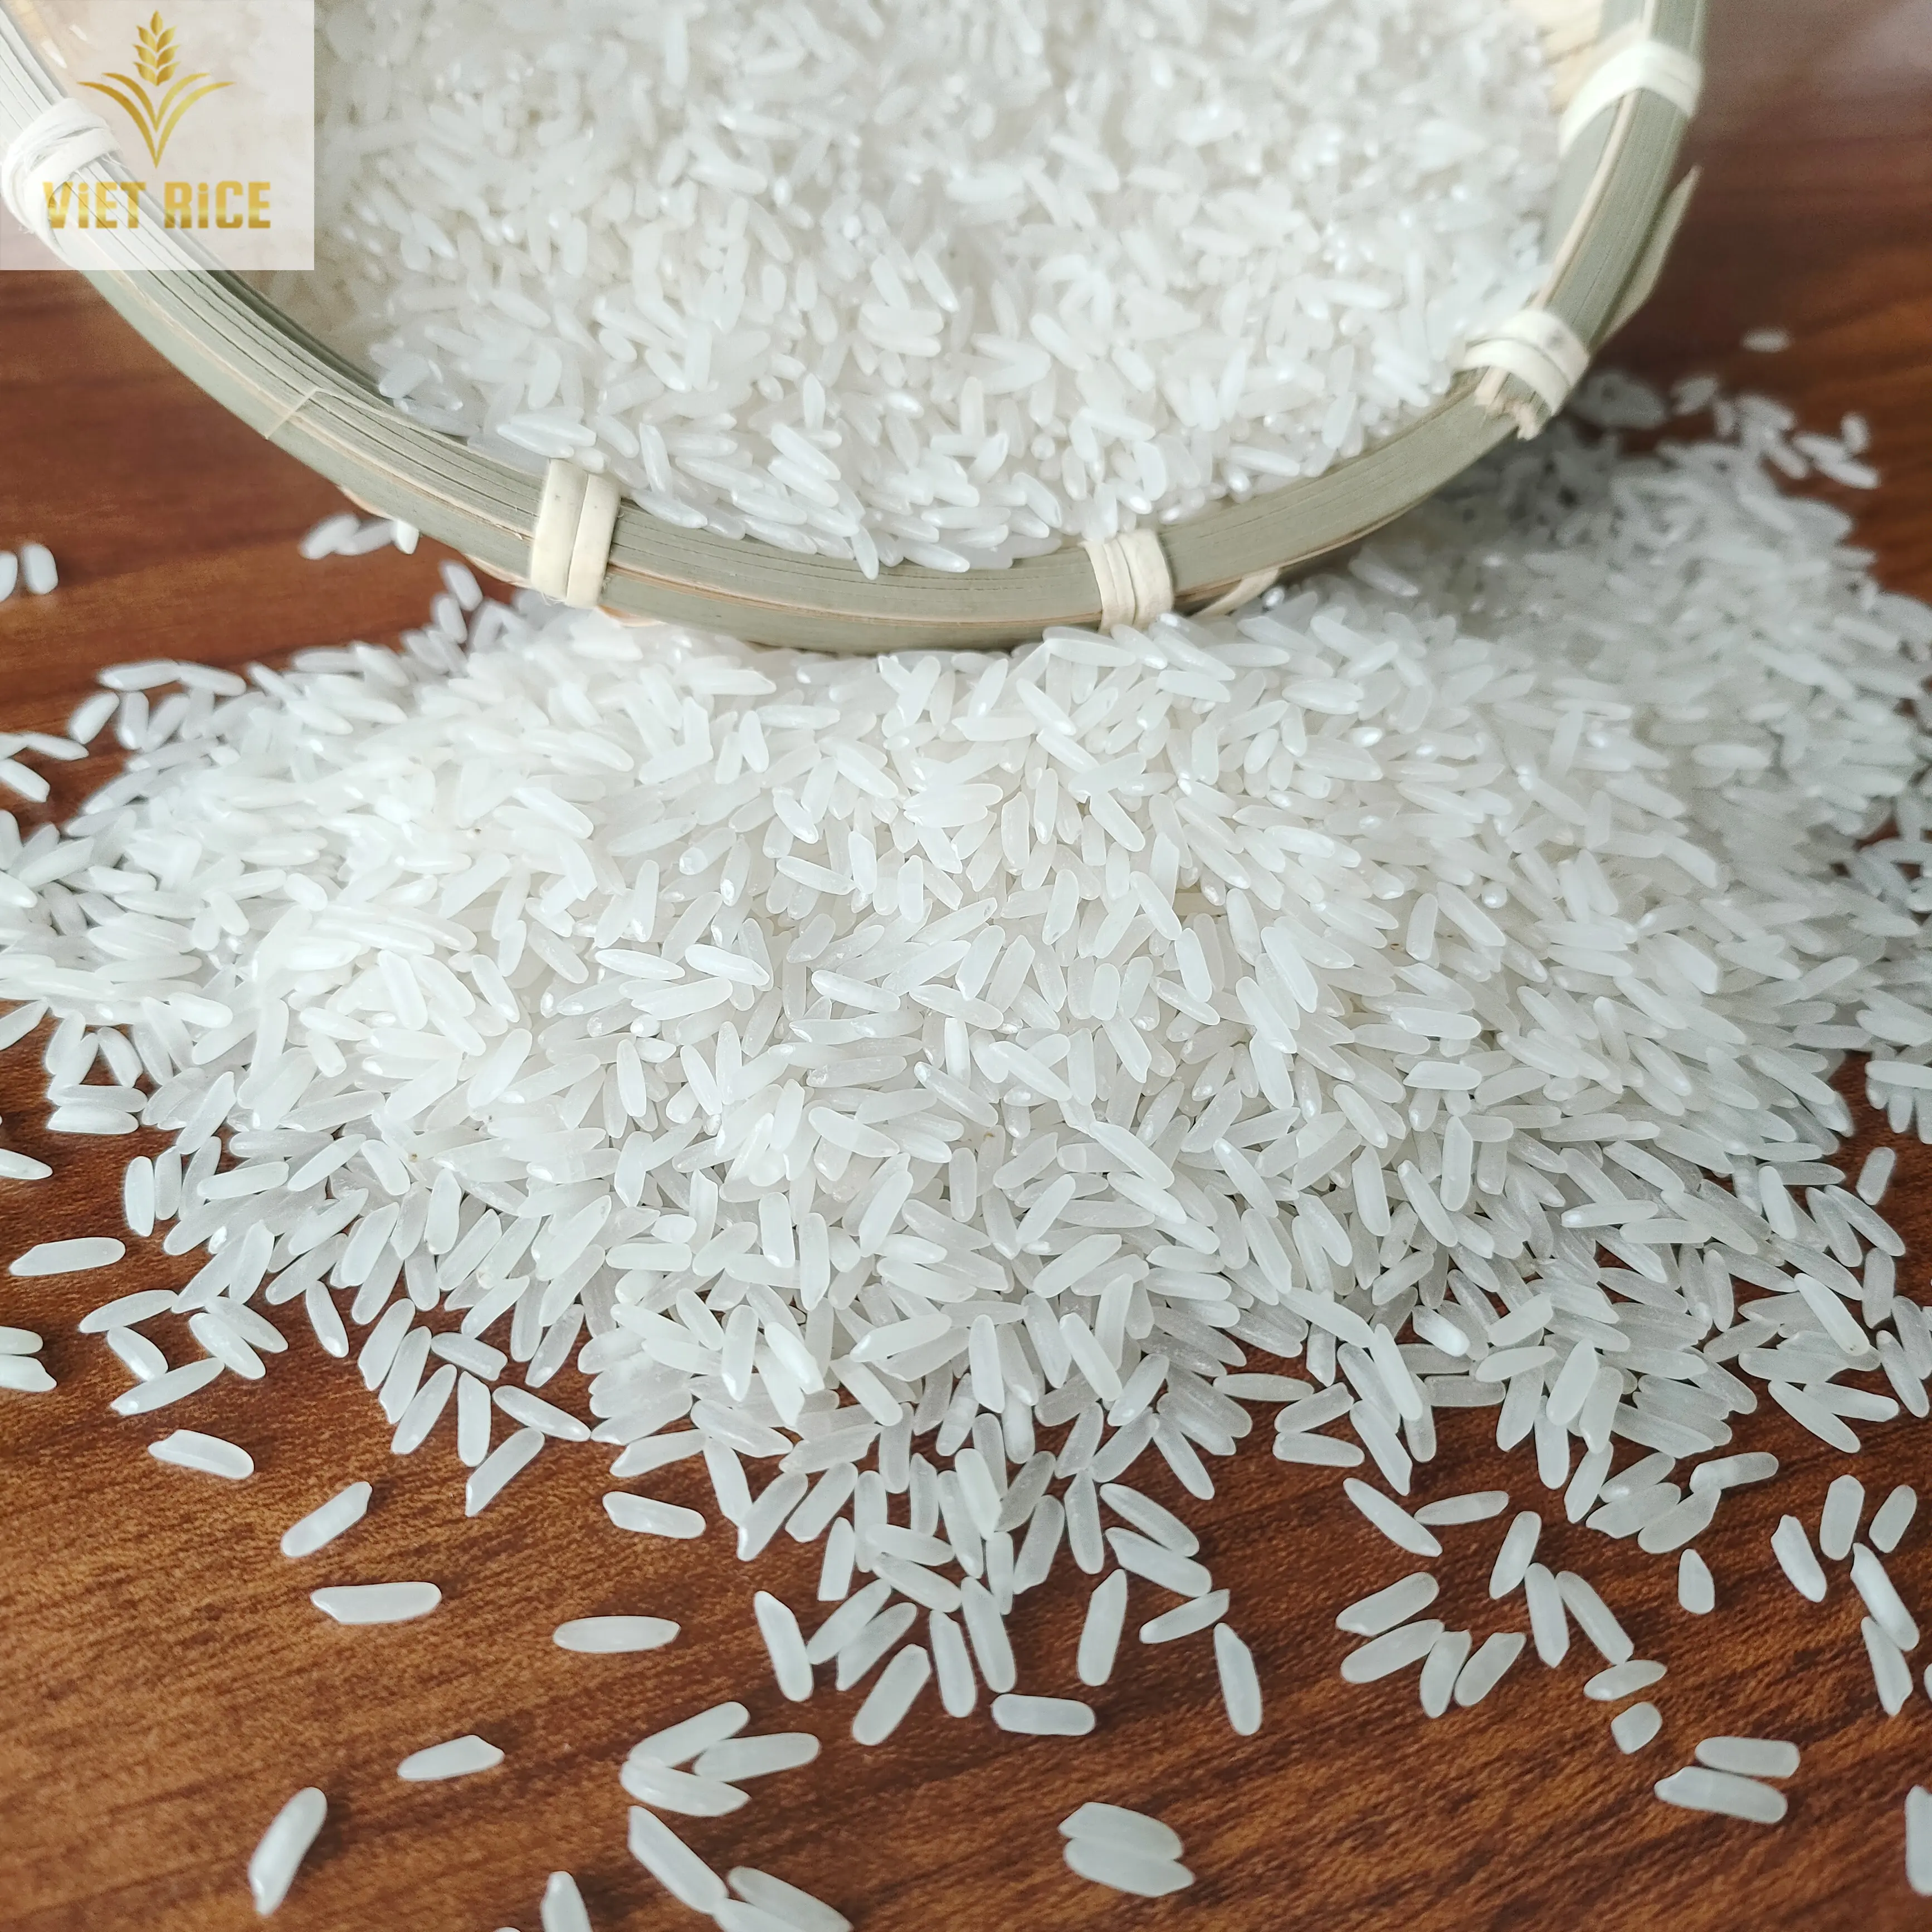 Best-selling VIETRICE's Jasmine 5% Broken Fragrant White Rice is reasonably priced and readily satisfies global requirements.